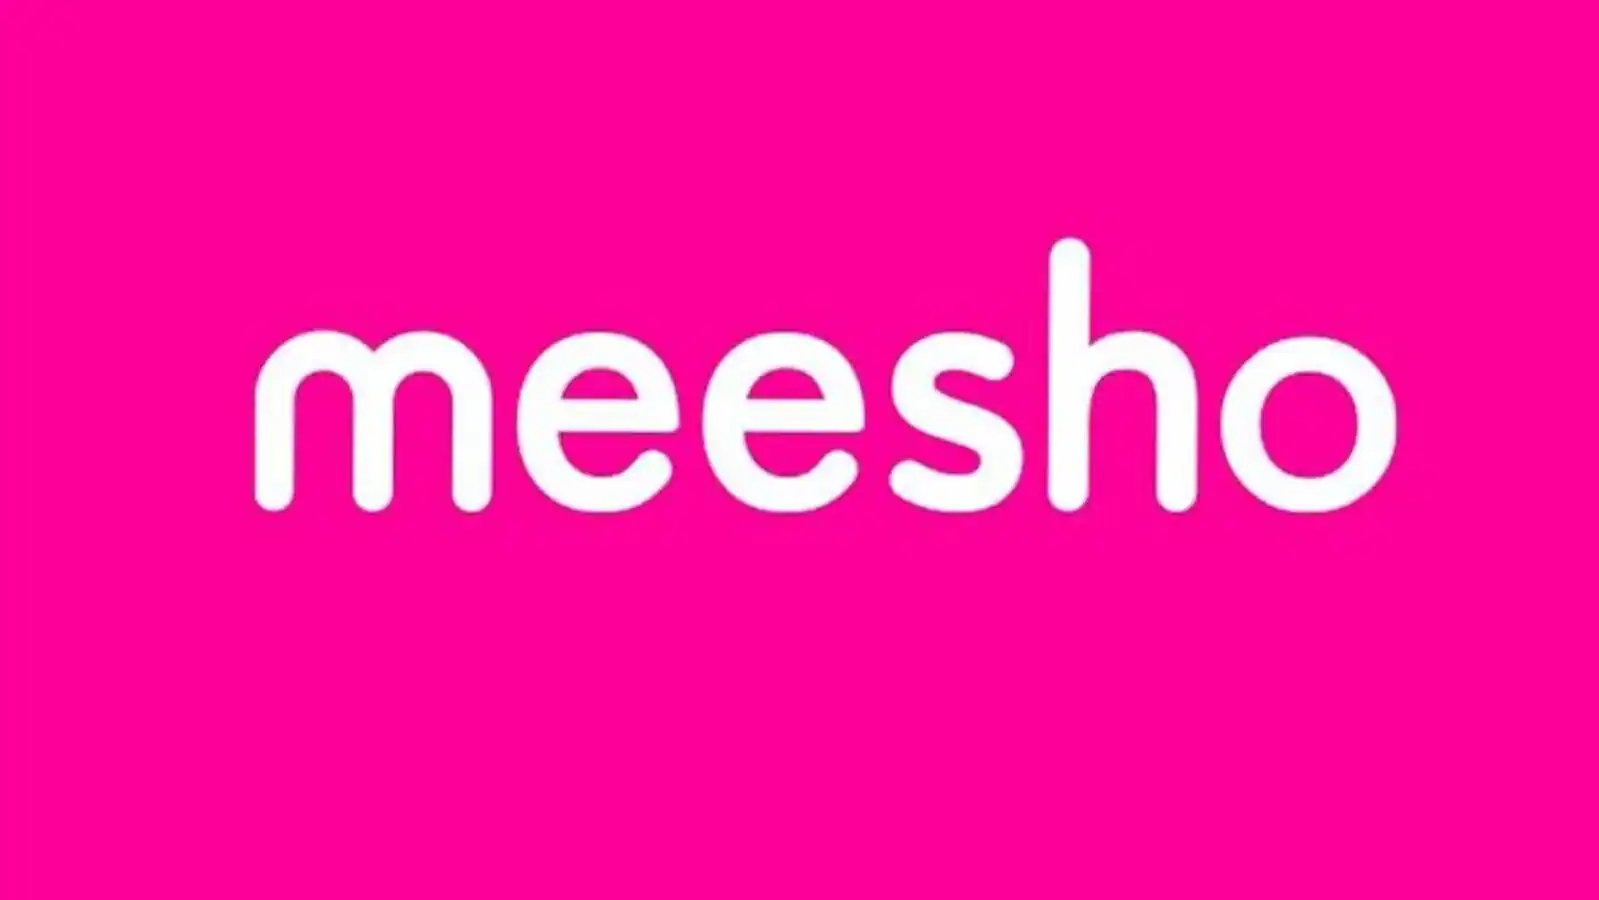 How to Use Meesho Login to Make Money Online